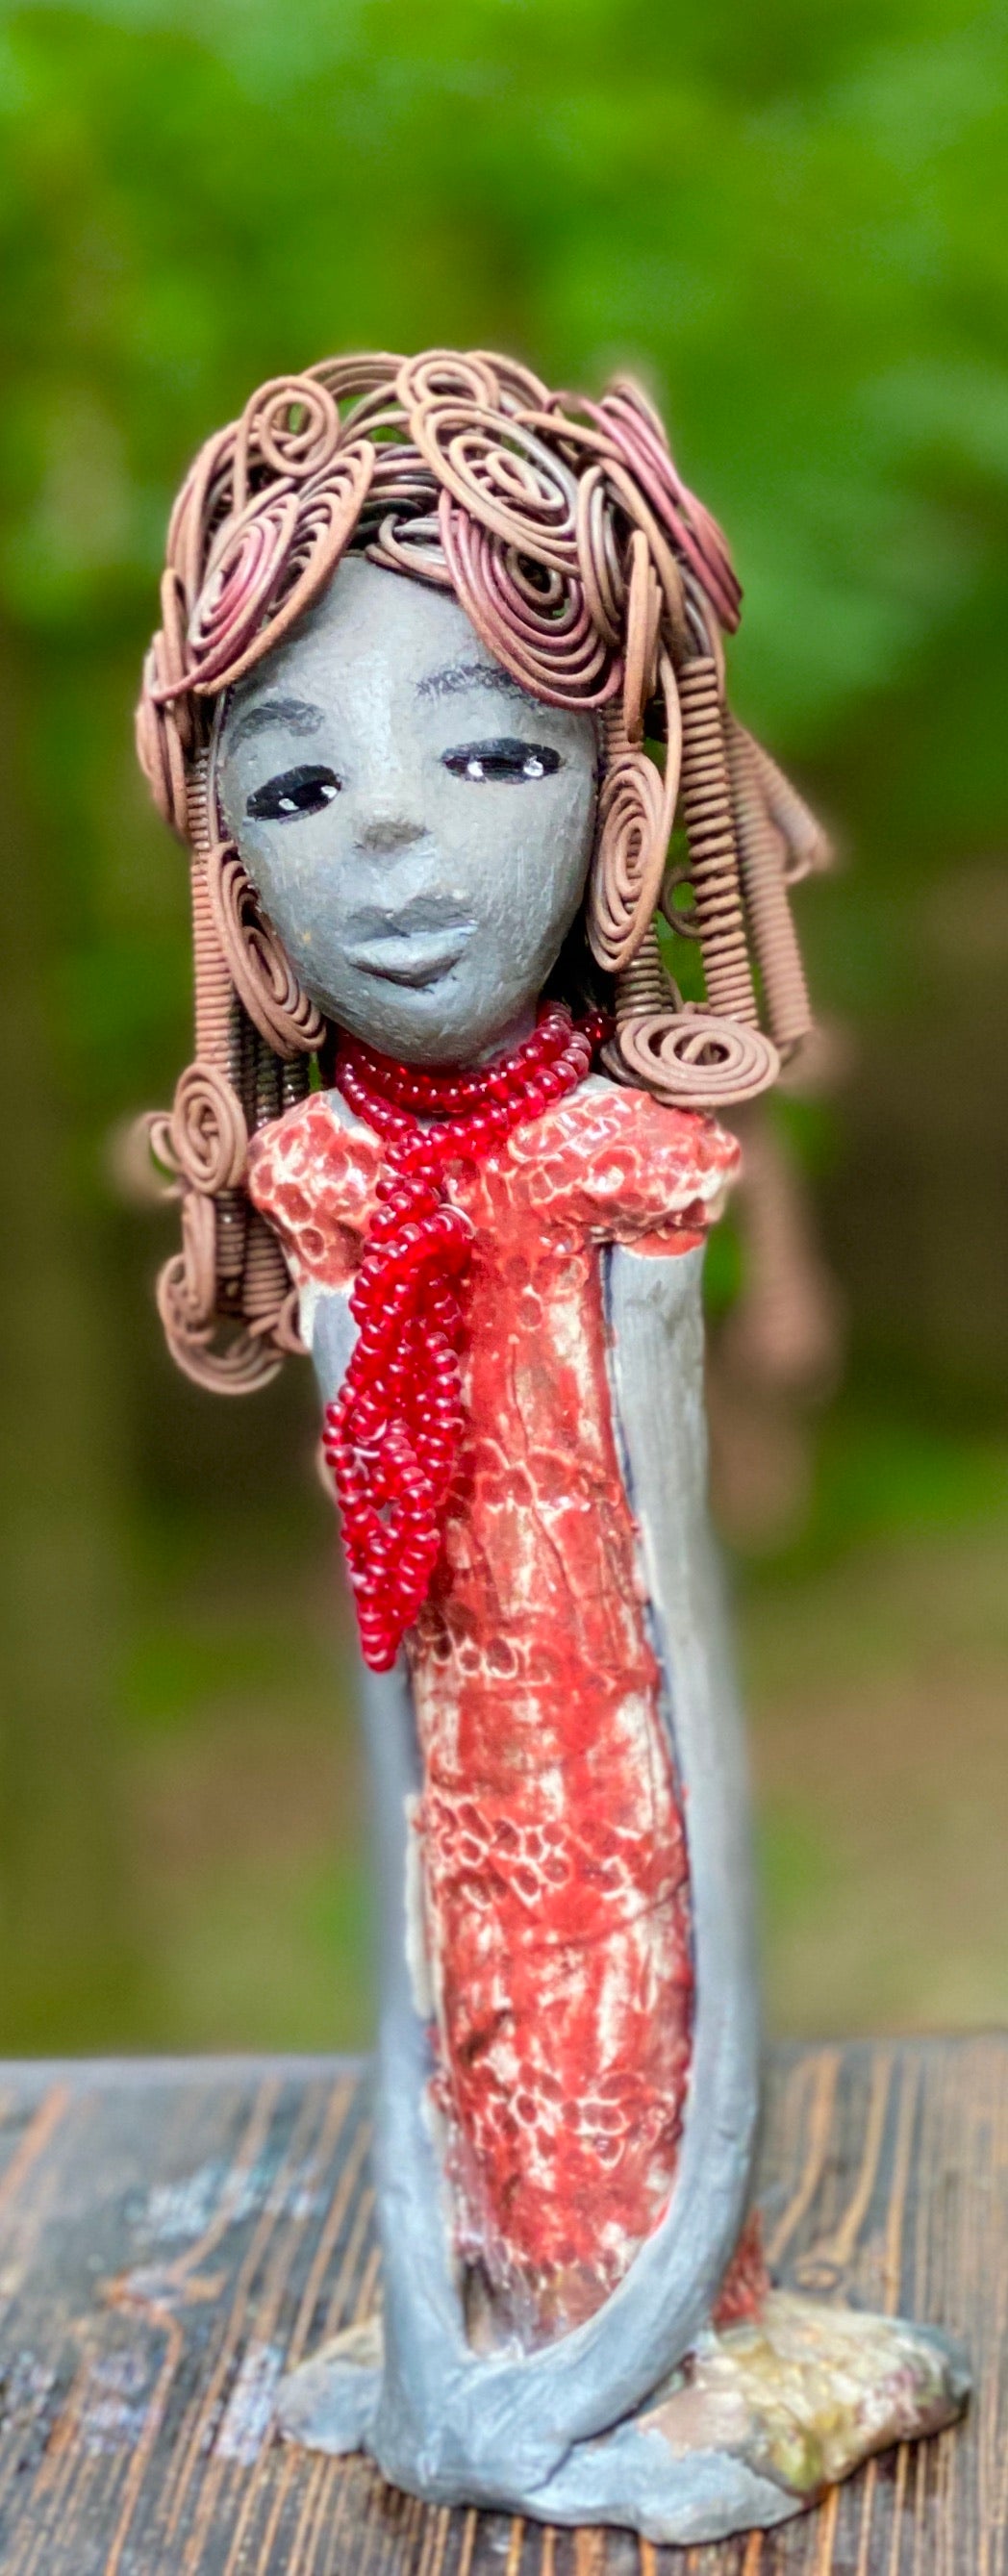 Meet Reagan! Reagan stands 12" x 4" x 4" and weighs 2.10 lbs. Reagan has a lovely dark complexion. It took over two hours to fix her Herdew! It is made of 16 gauge wire. Reagan has a shimmering  metallic copper red dress. A strand of ruby red beads hangs around her neck. Reagan and her sister Carolyn are one of a kind. ( Sold Separately) Give Reagan and Carolyn a great Home!